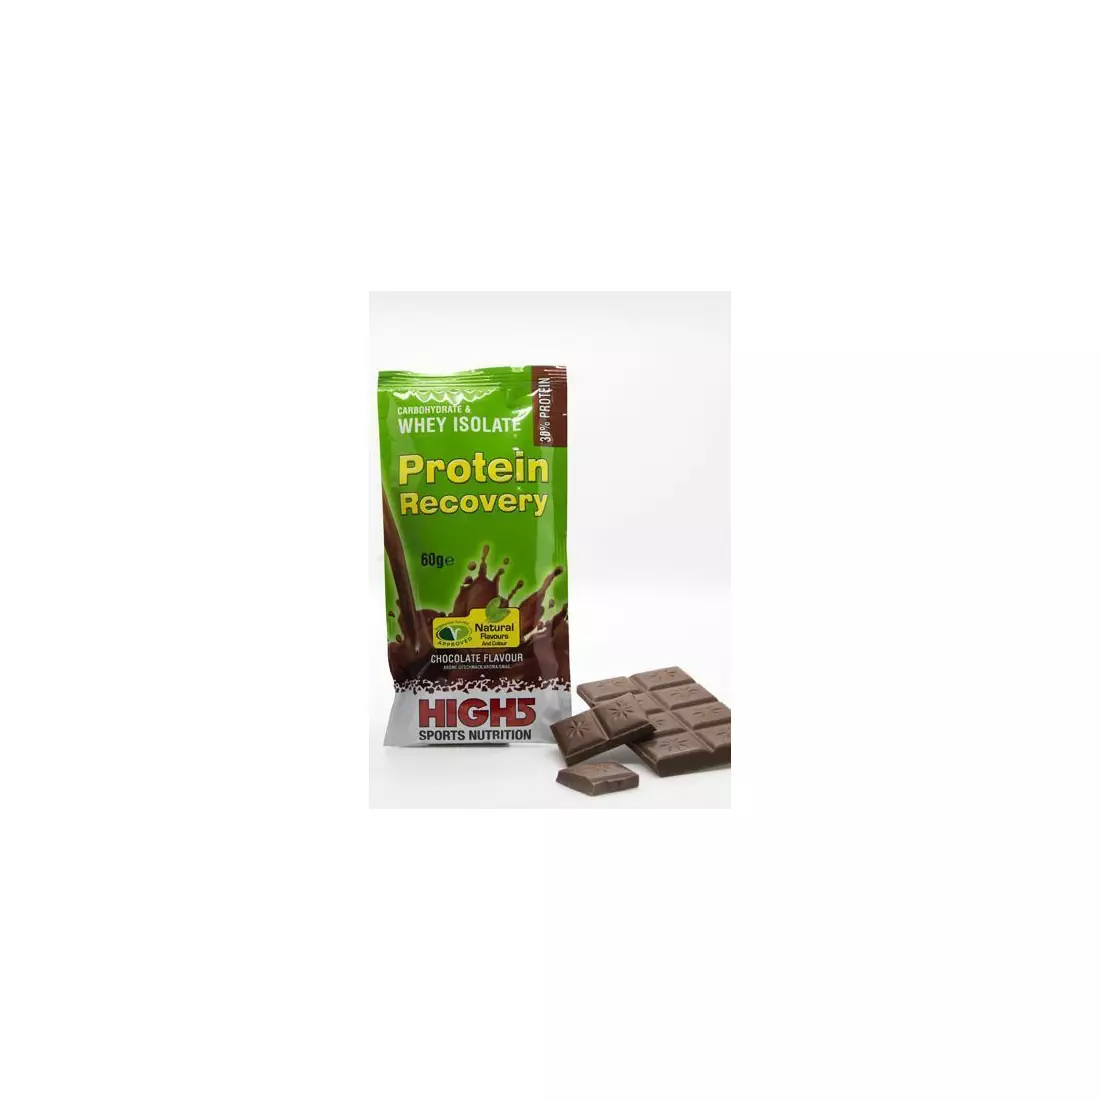 HIGH5 PROTEIN RECOVERY protein drink powder to dissolve, sachet 60 g flavor: CHOCOLATE